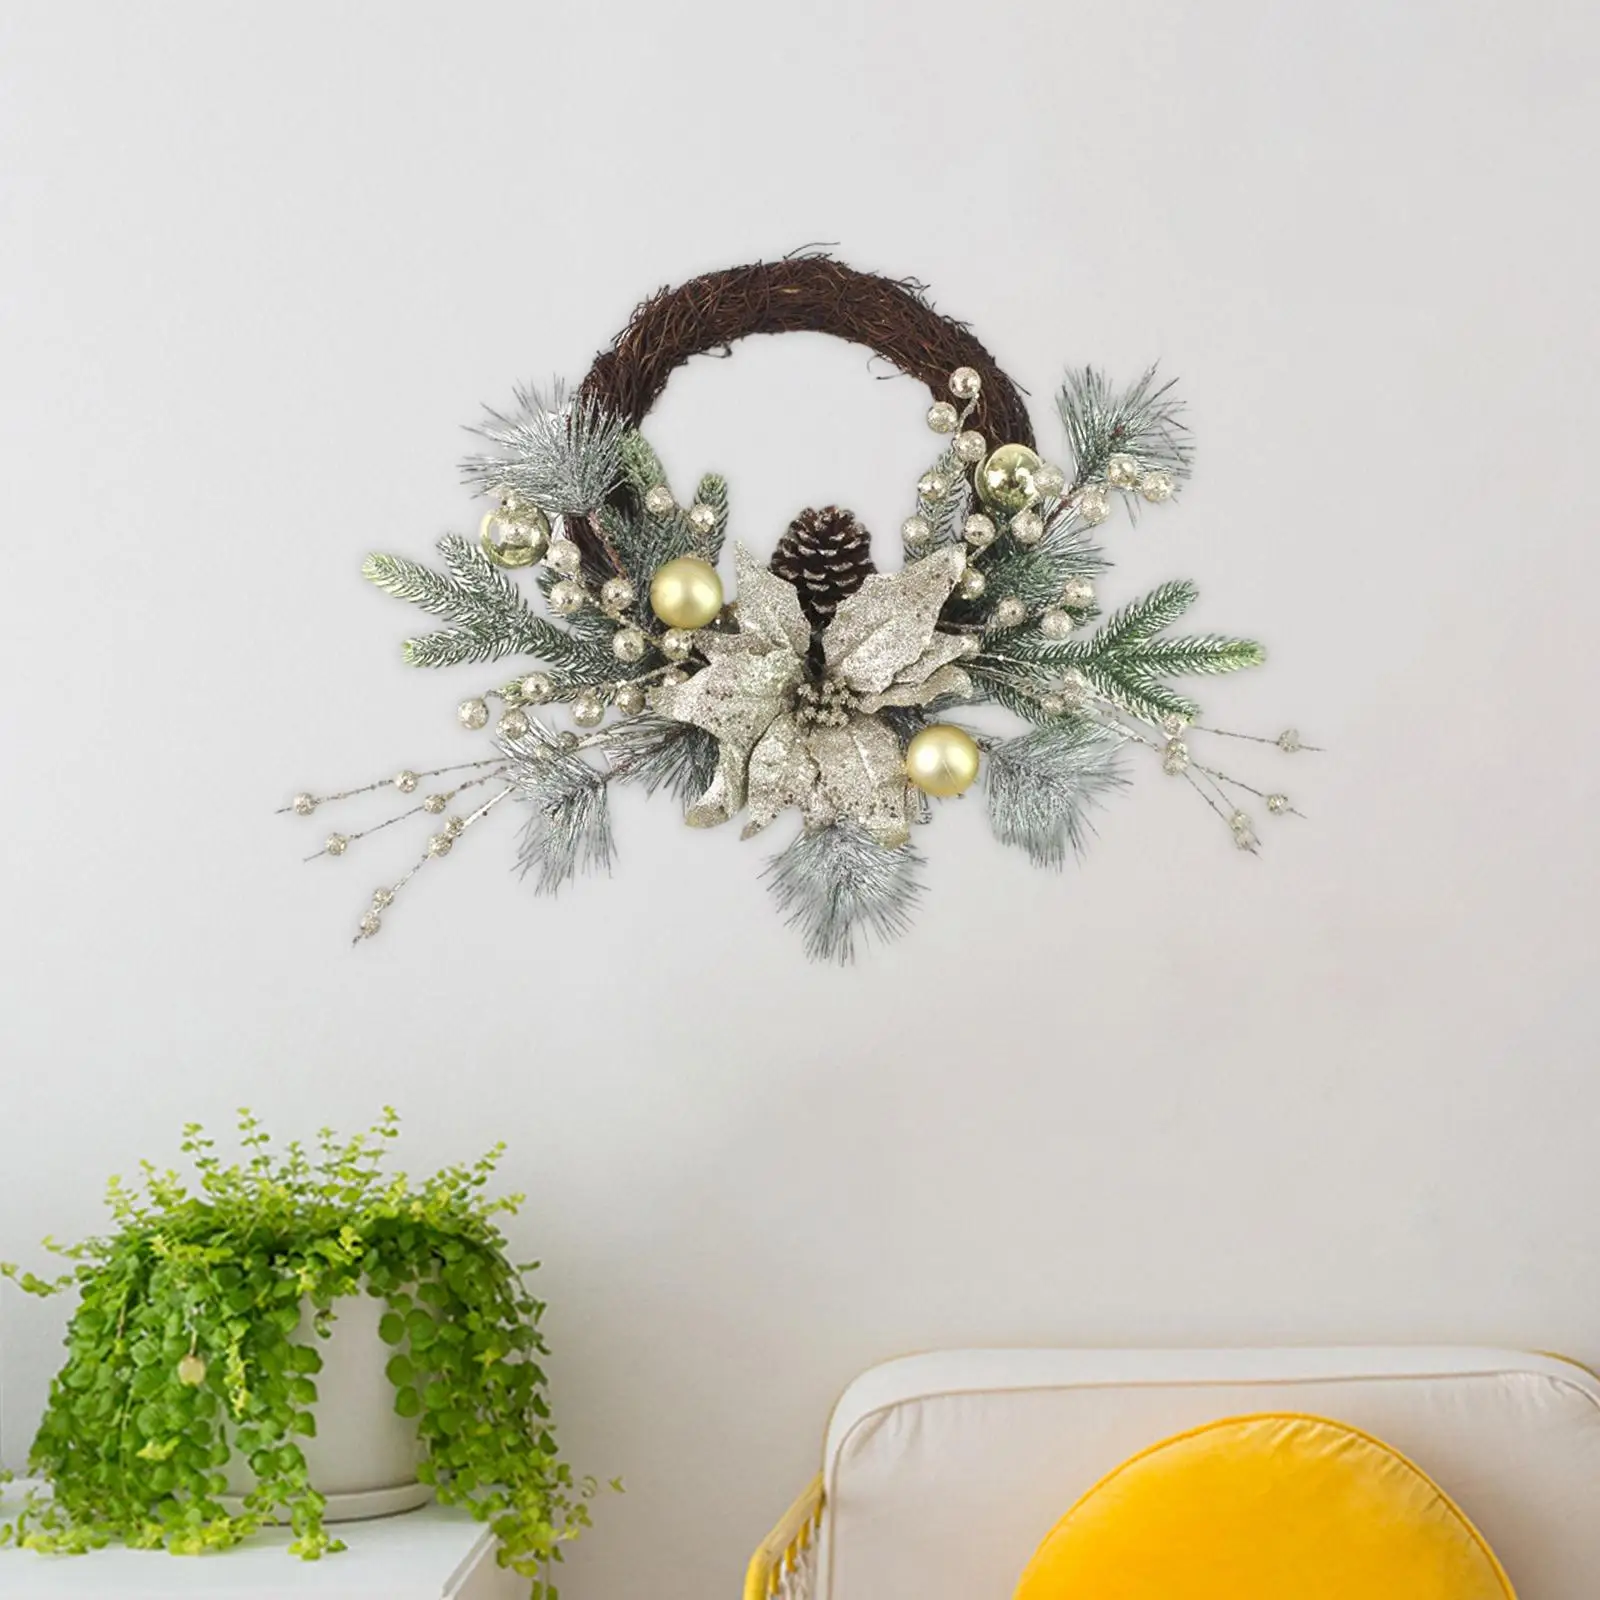 Christmas Wreath with Lights Round Wreath Holiday Party Decor Christmas Rattan Wreath for Wall Indoor Wedding Xmas Outside